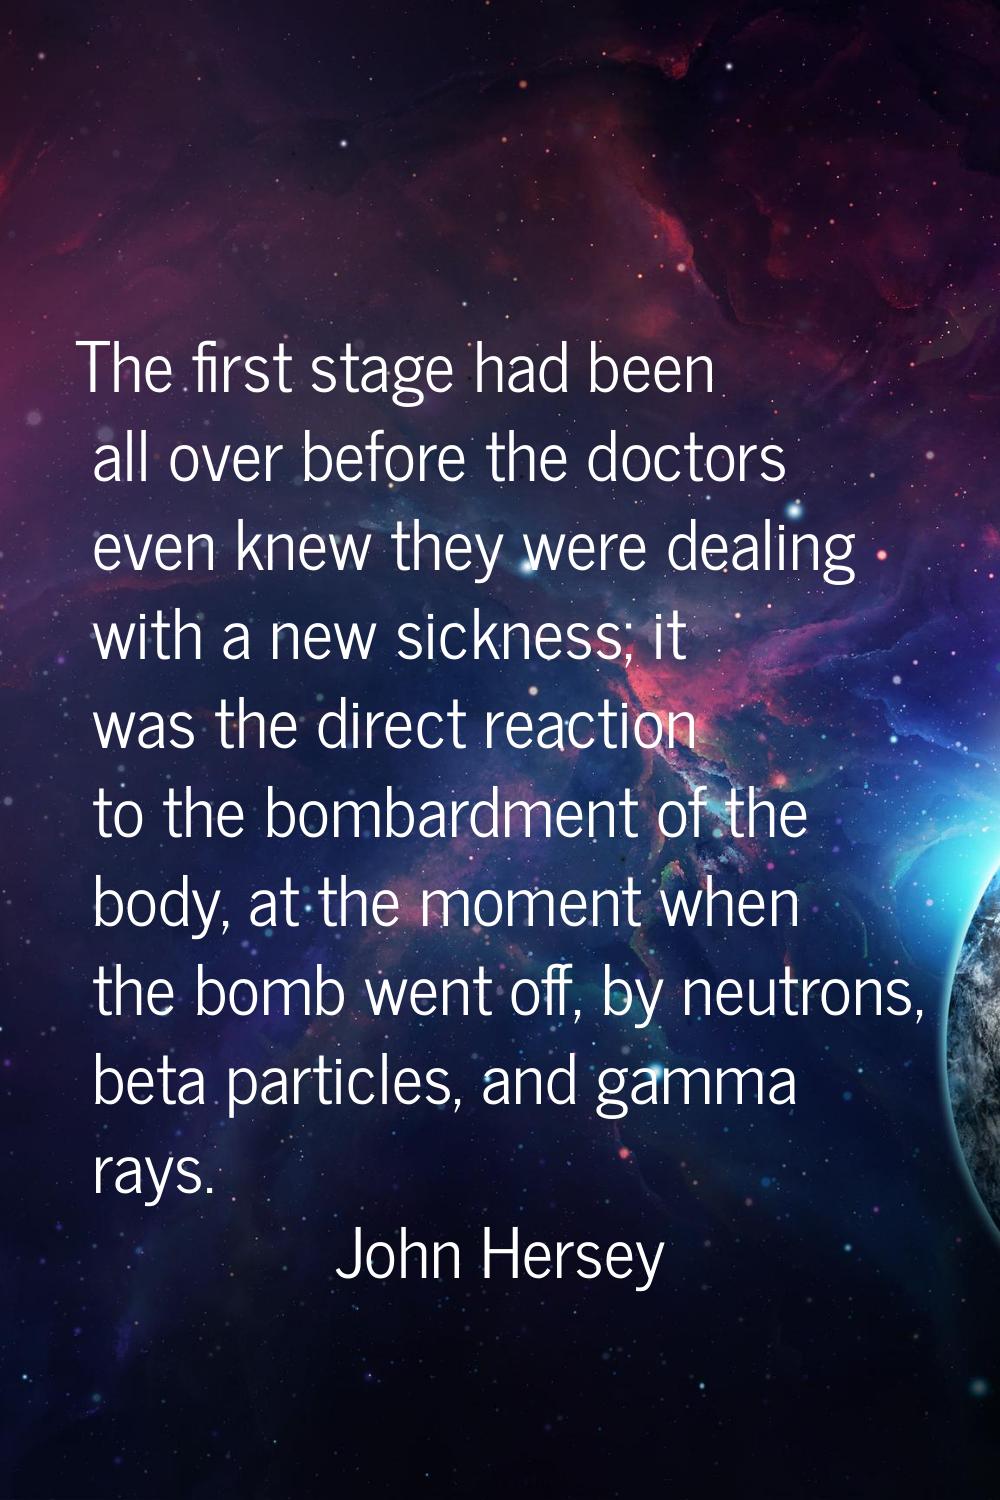 The first stage had been all over before the doctors even knew they were dealing with a new sicknes